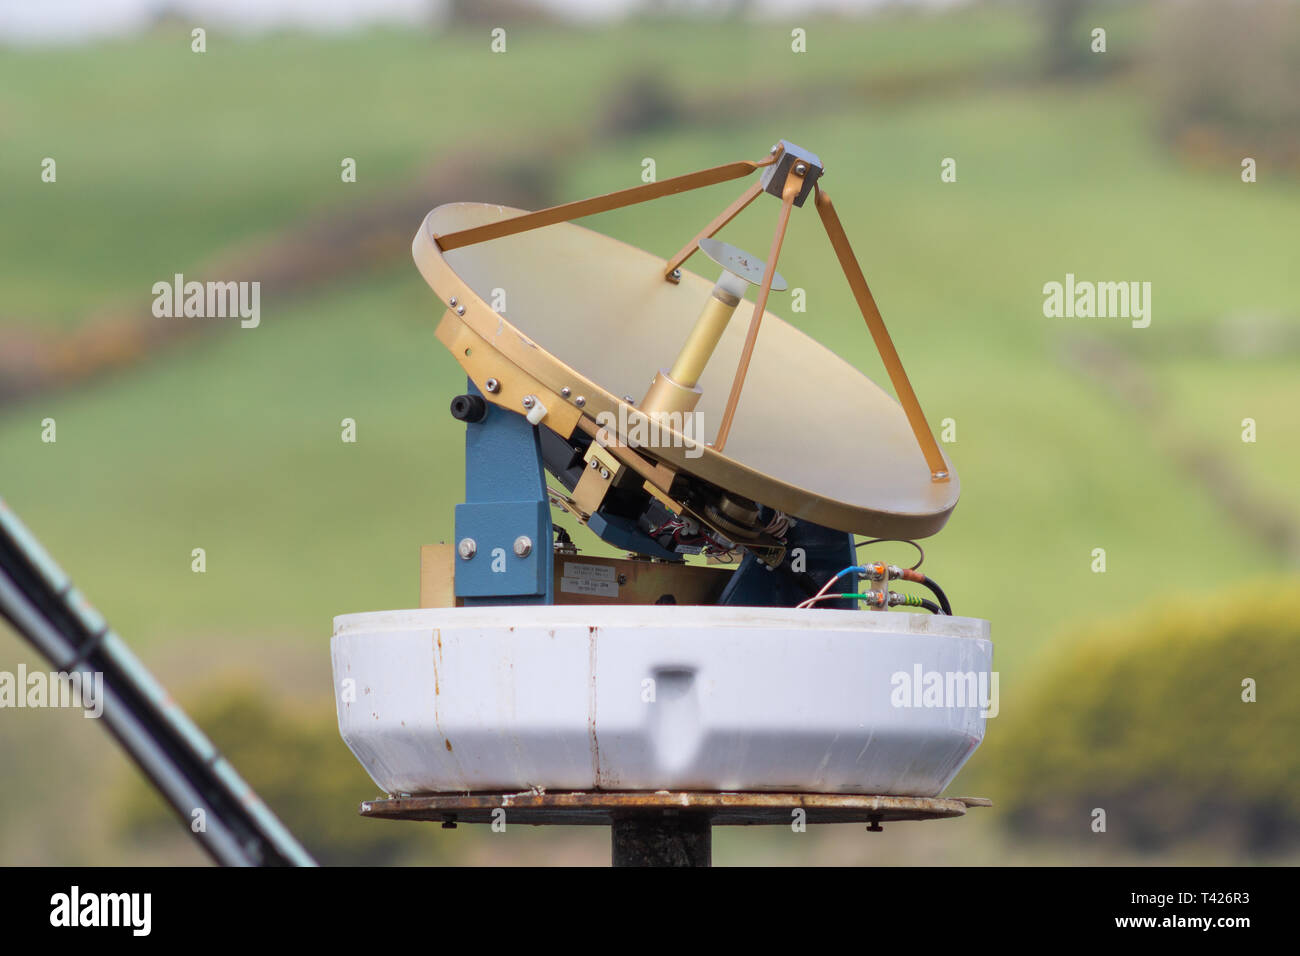 marine radar aerial with cover removed Stock Photo